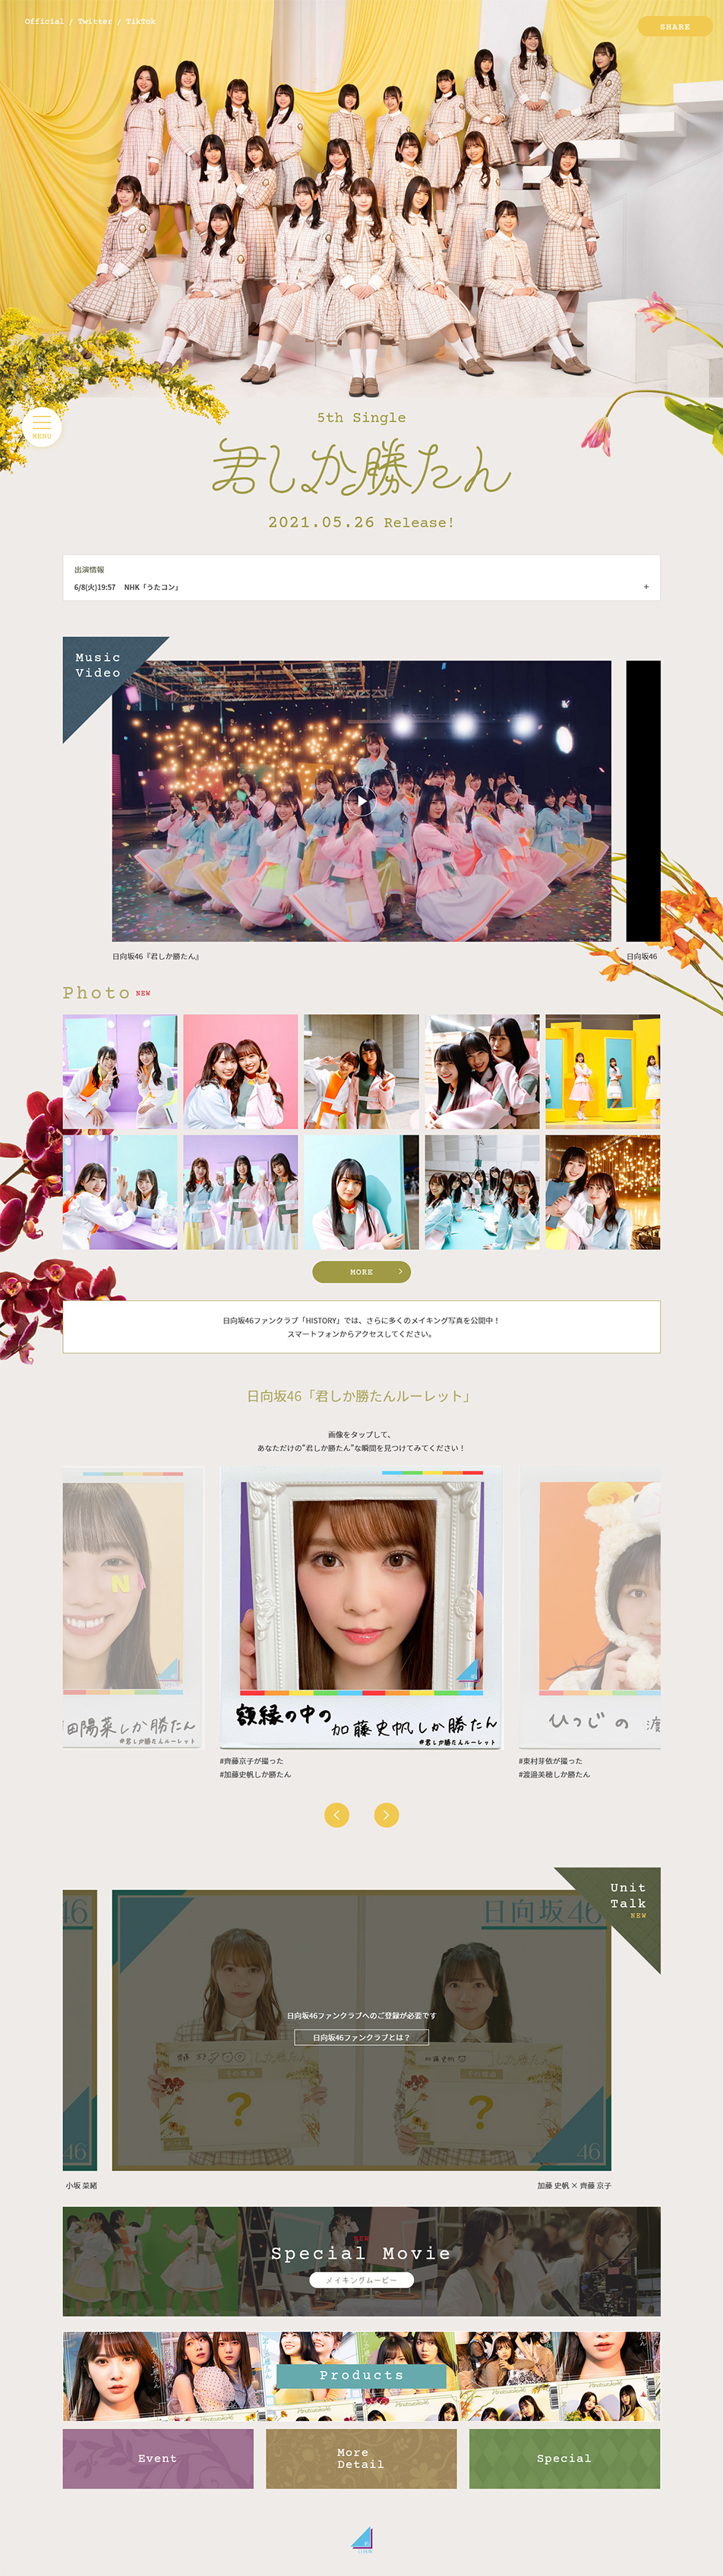 5th single「君しか勝たん」SPECIAL SITE_pc_1